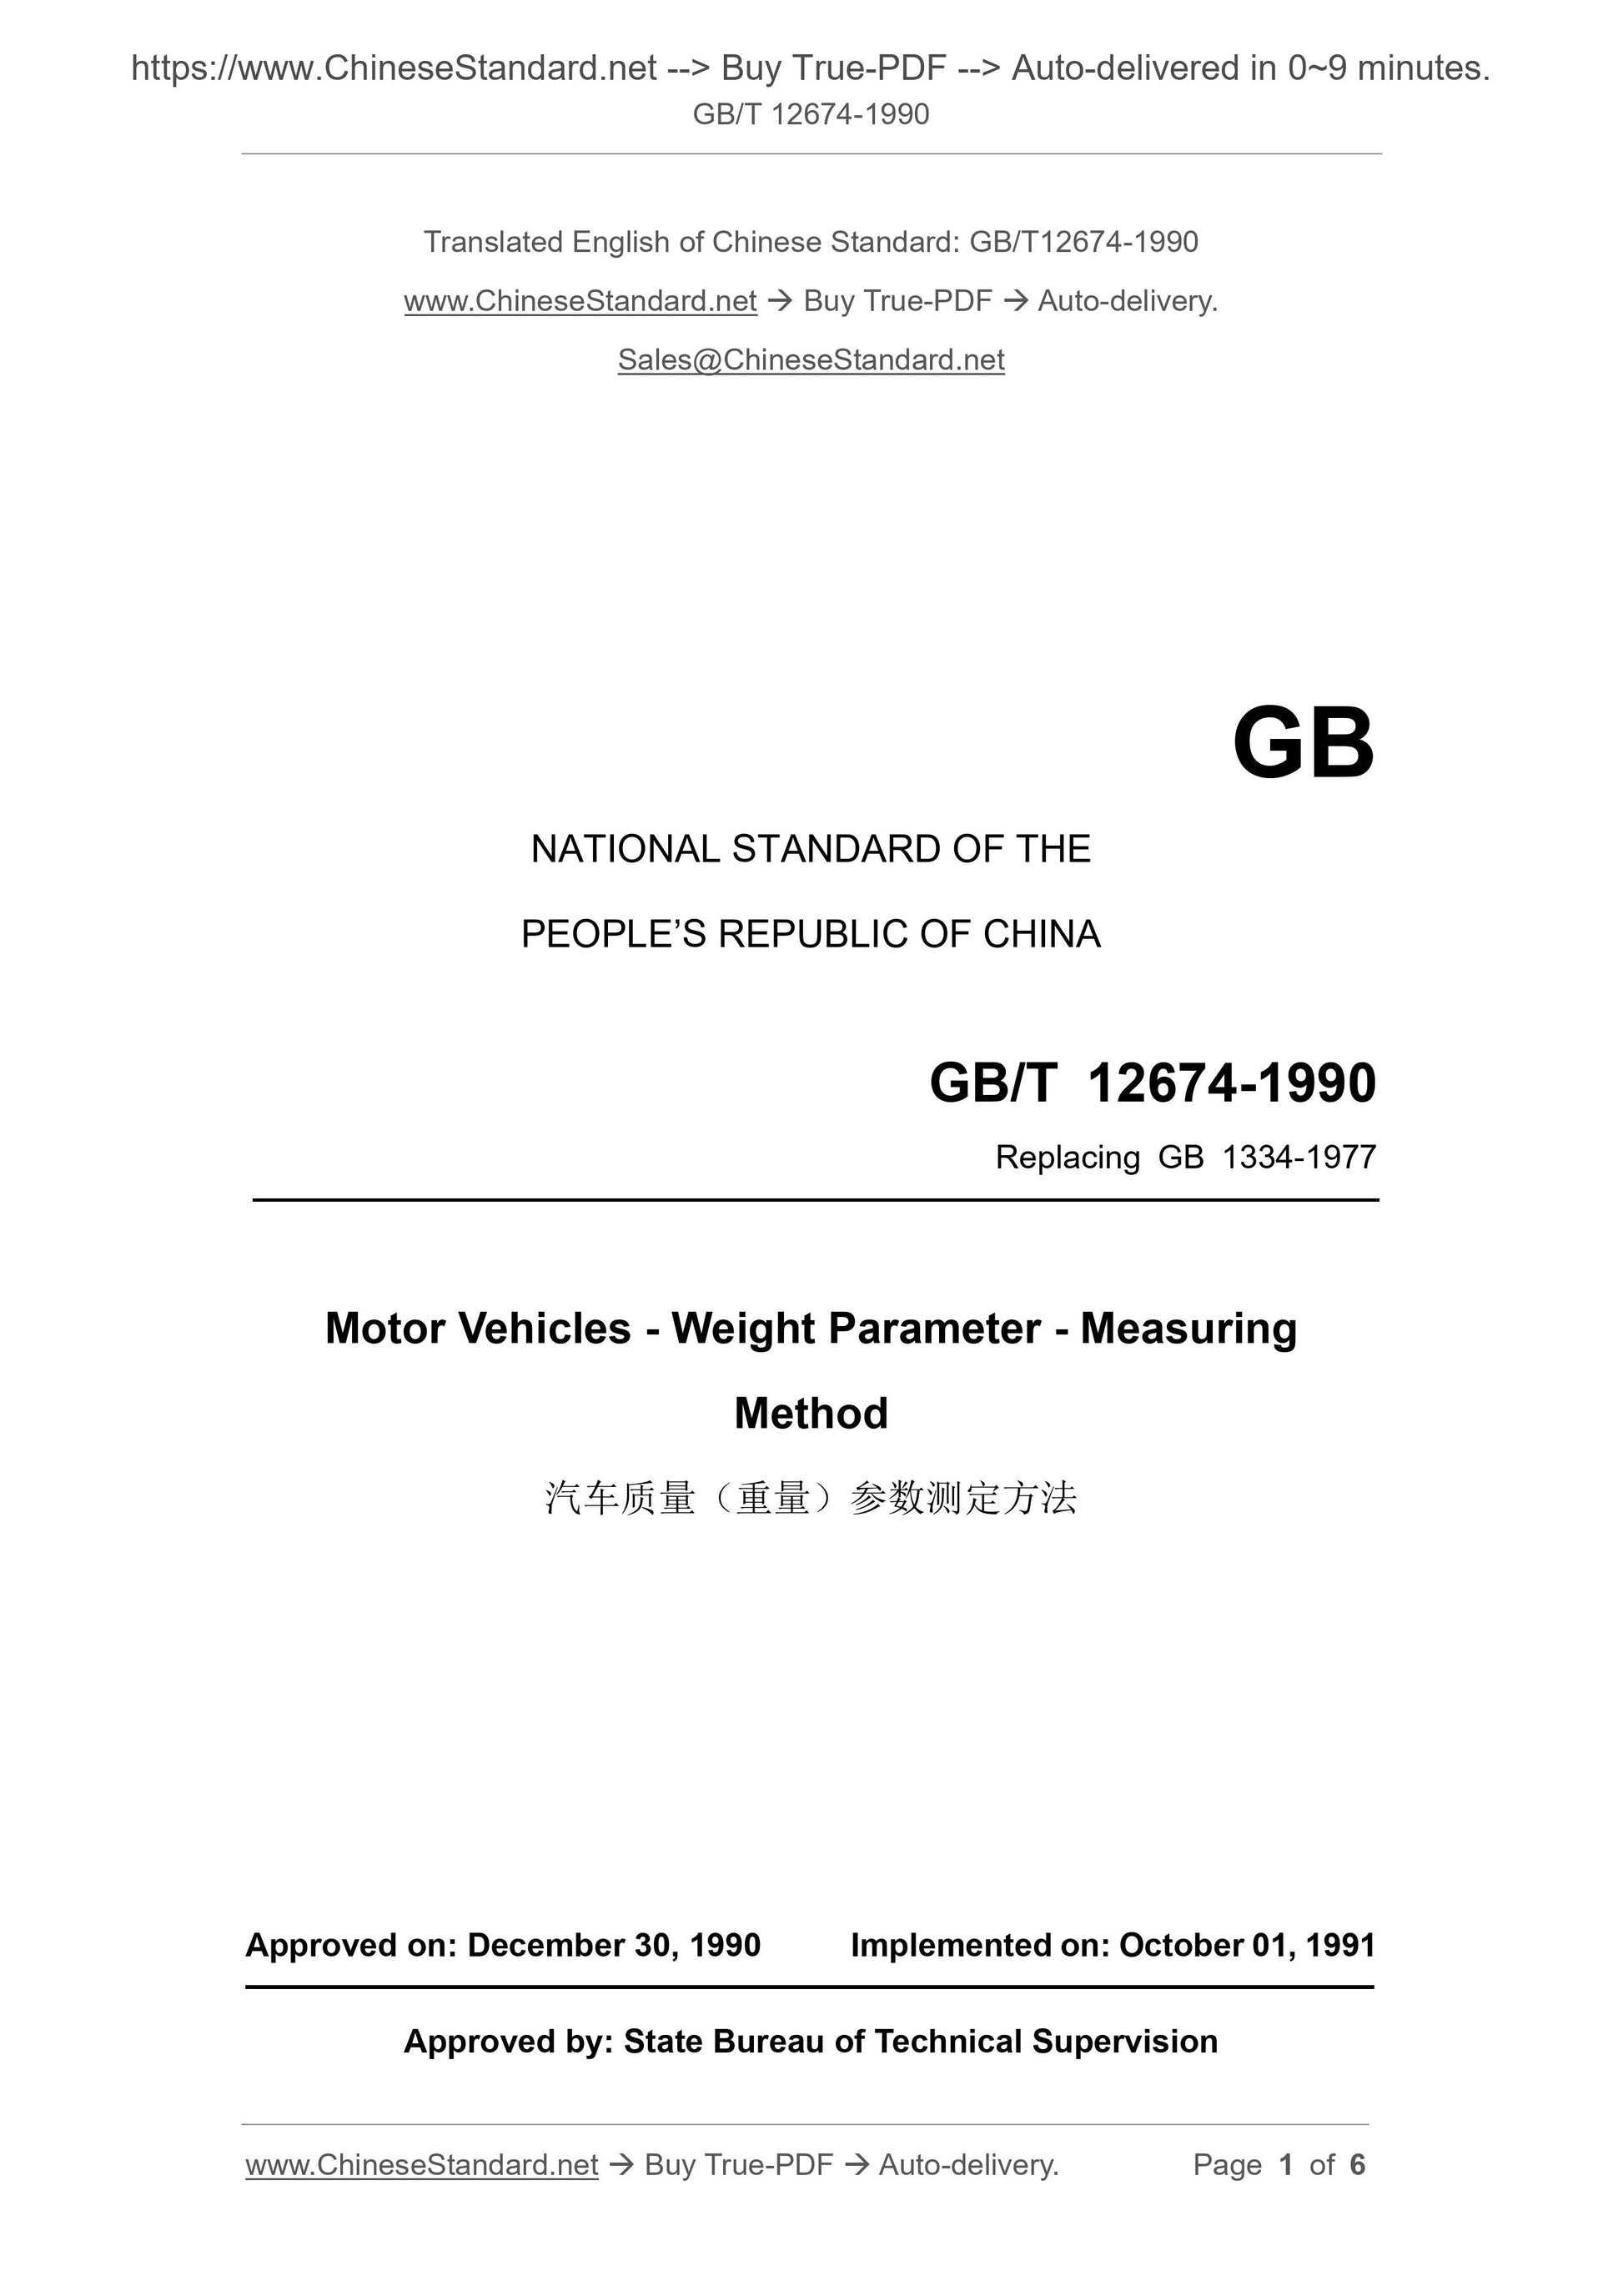 GB/T 12674-1990 Page 1